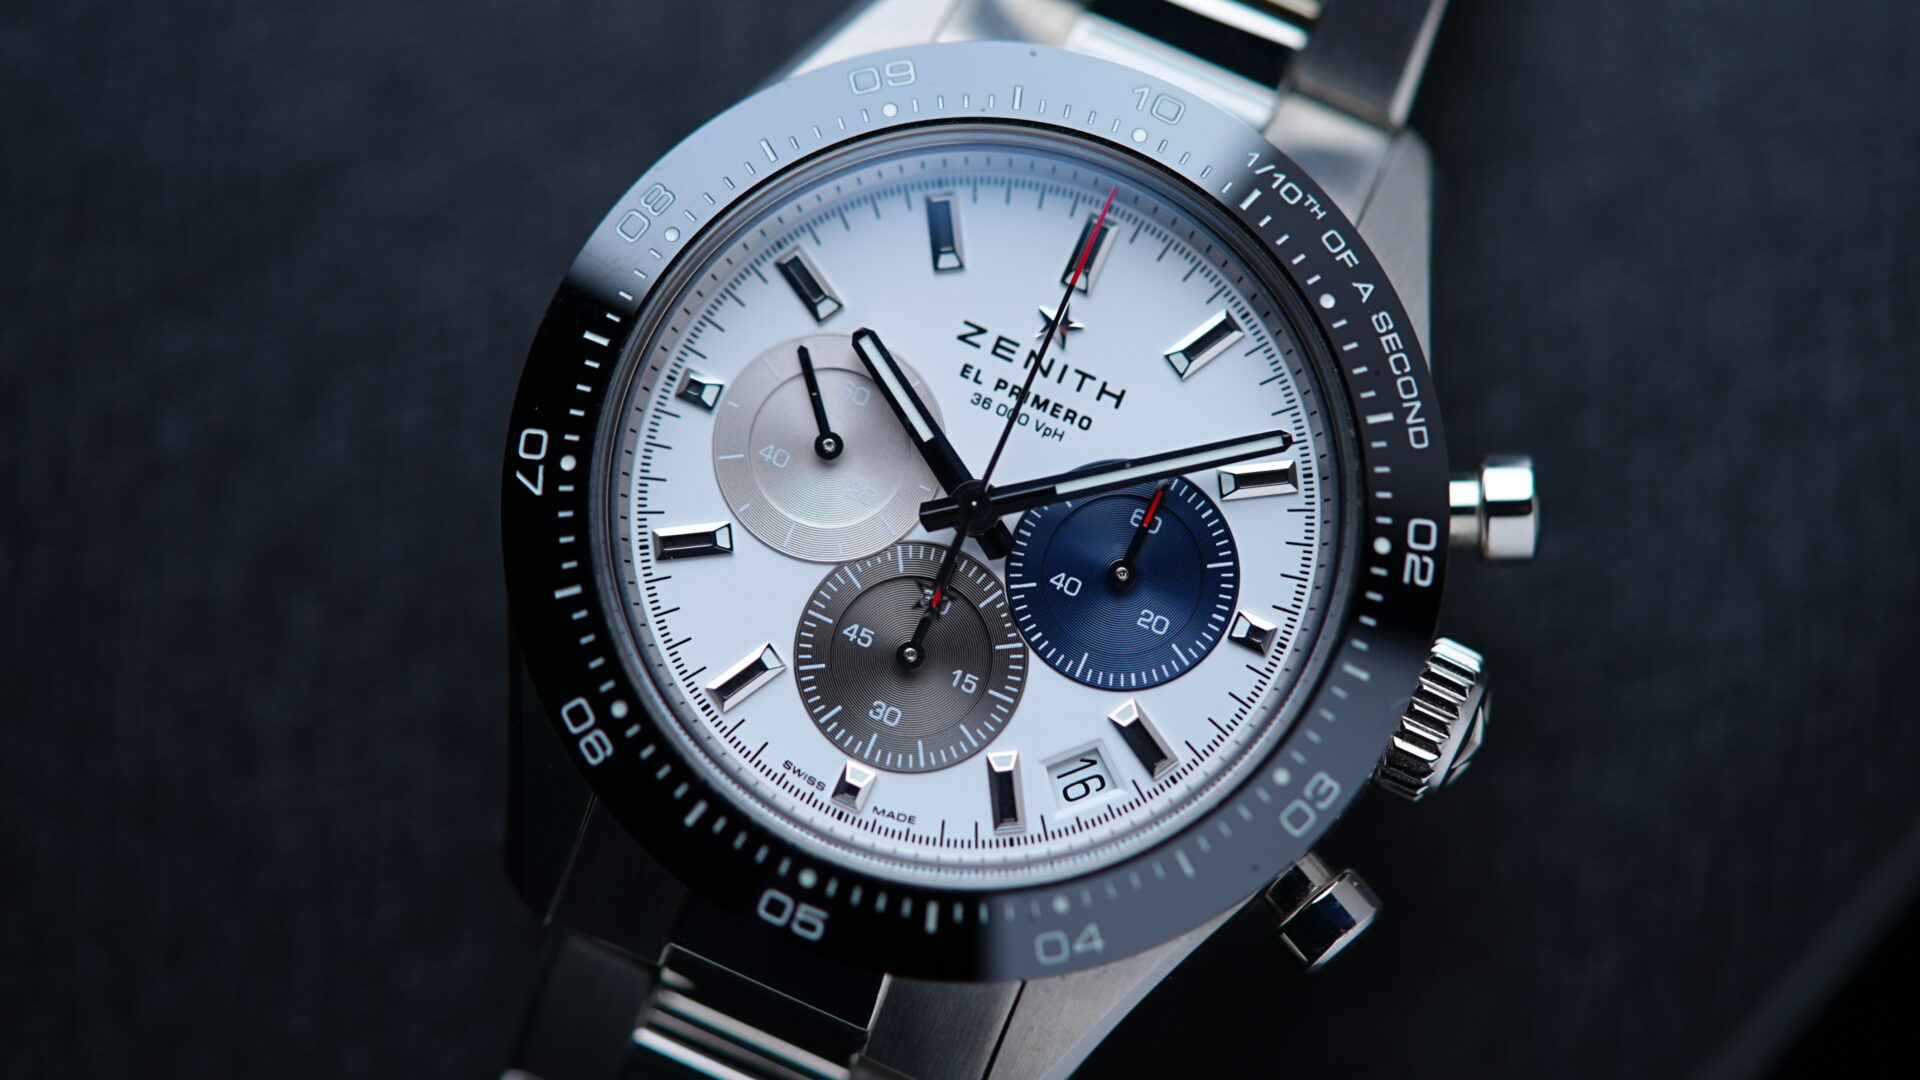 Close up picture of the Zenith Chronomaster Sport Panda watch.